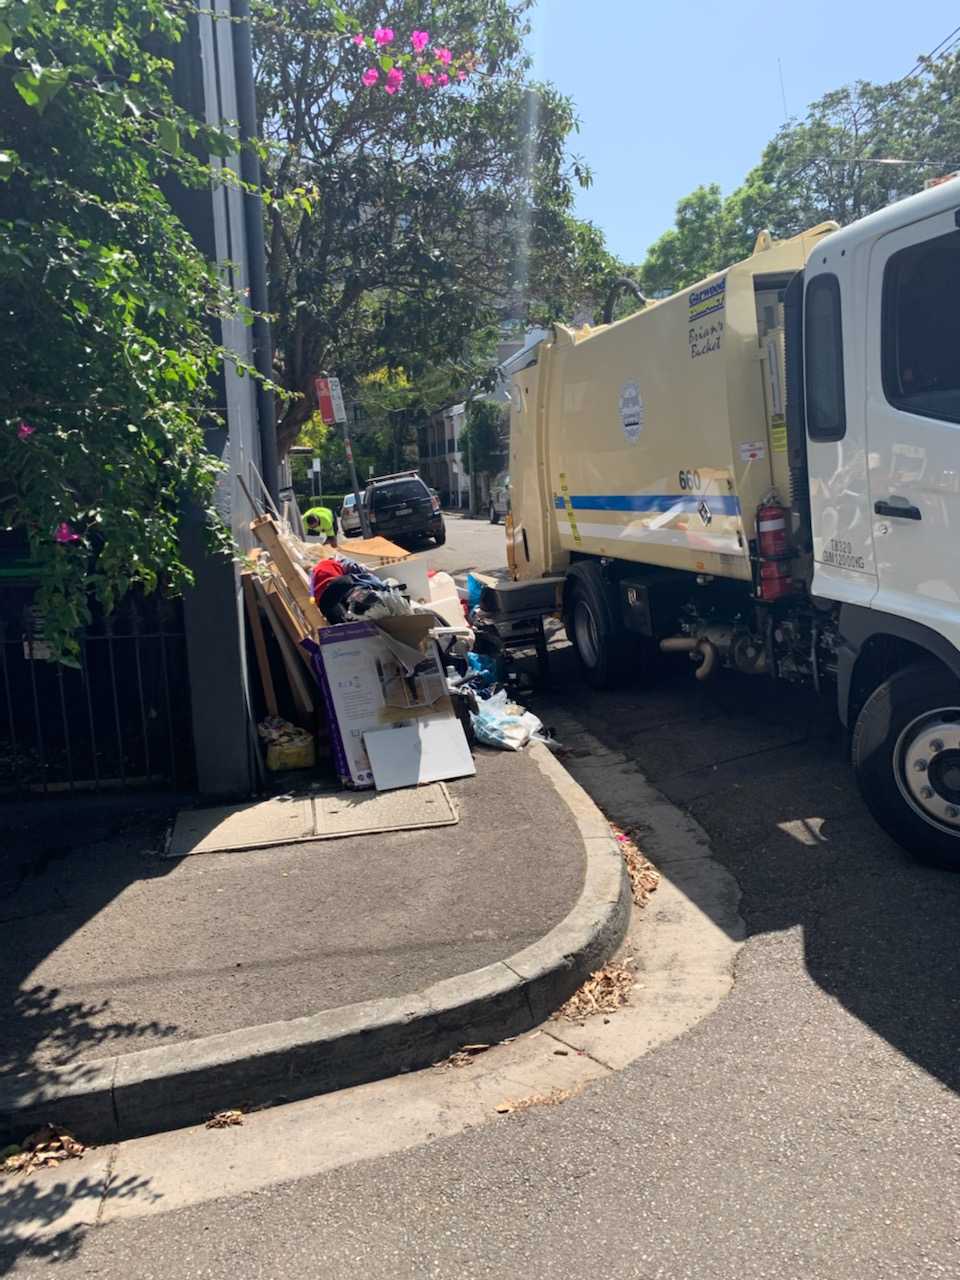 The rubbish has accumulated on Glebe Street in Edgecliff. Source: Riley Morgan